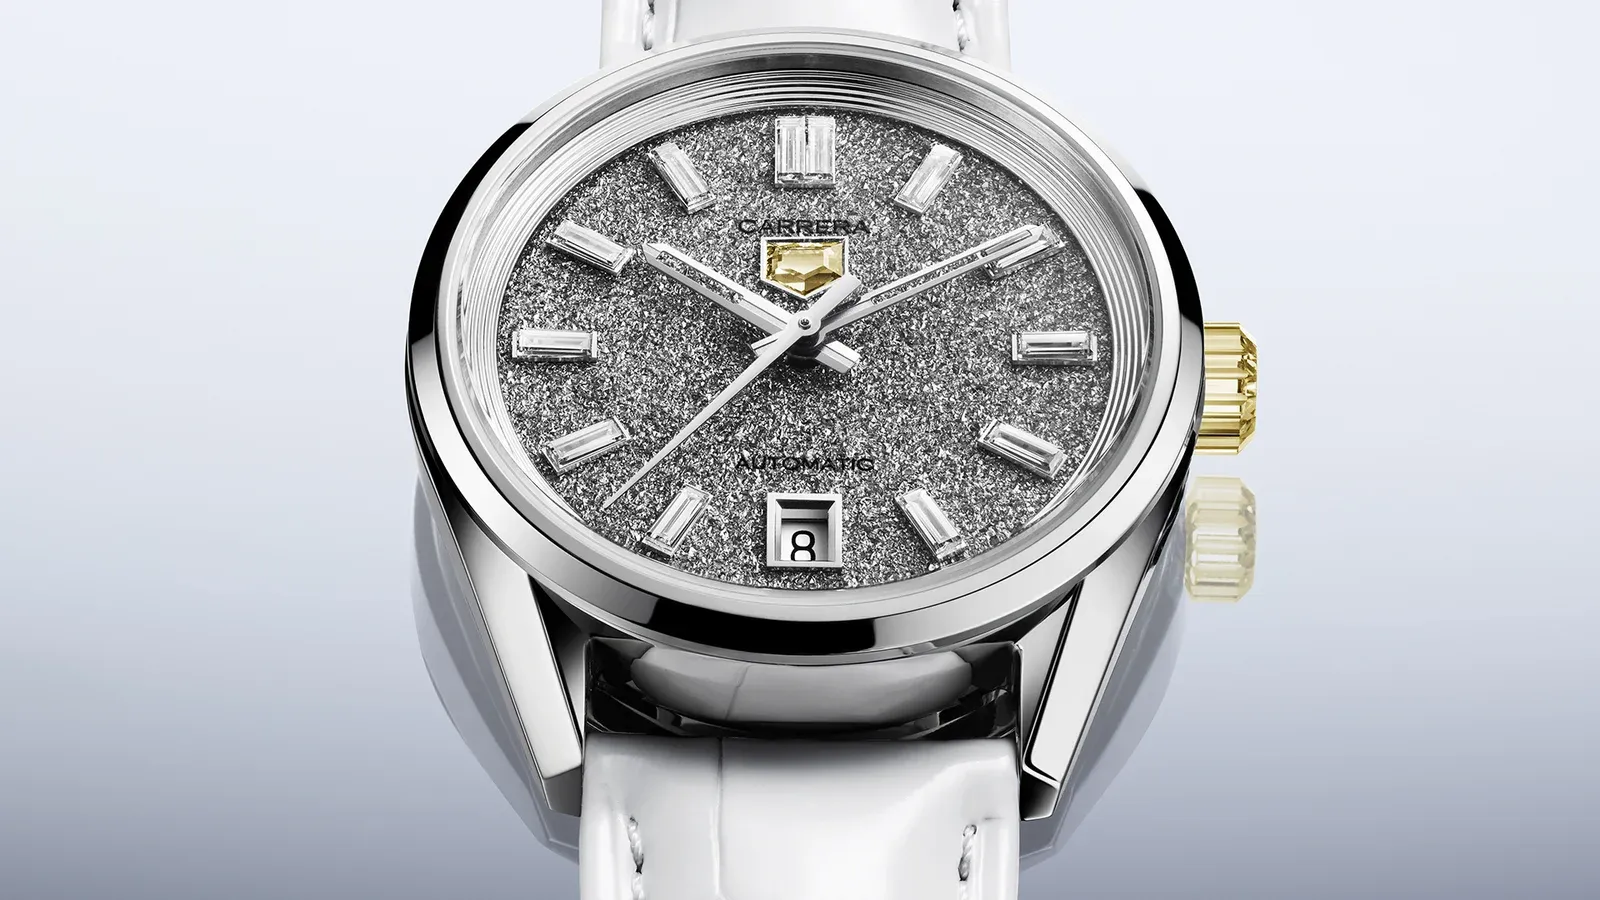 This watch is a showcase of TAG Heuer's commitment to innovation and sustainability